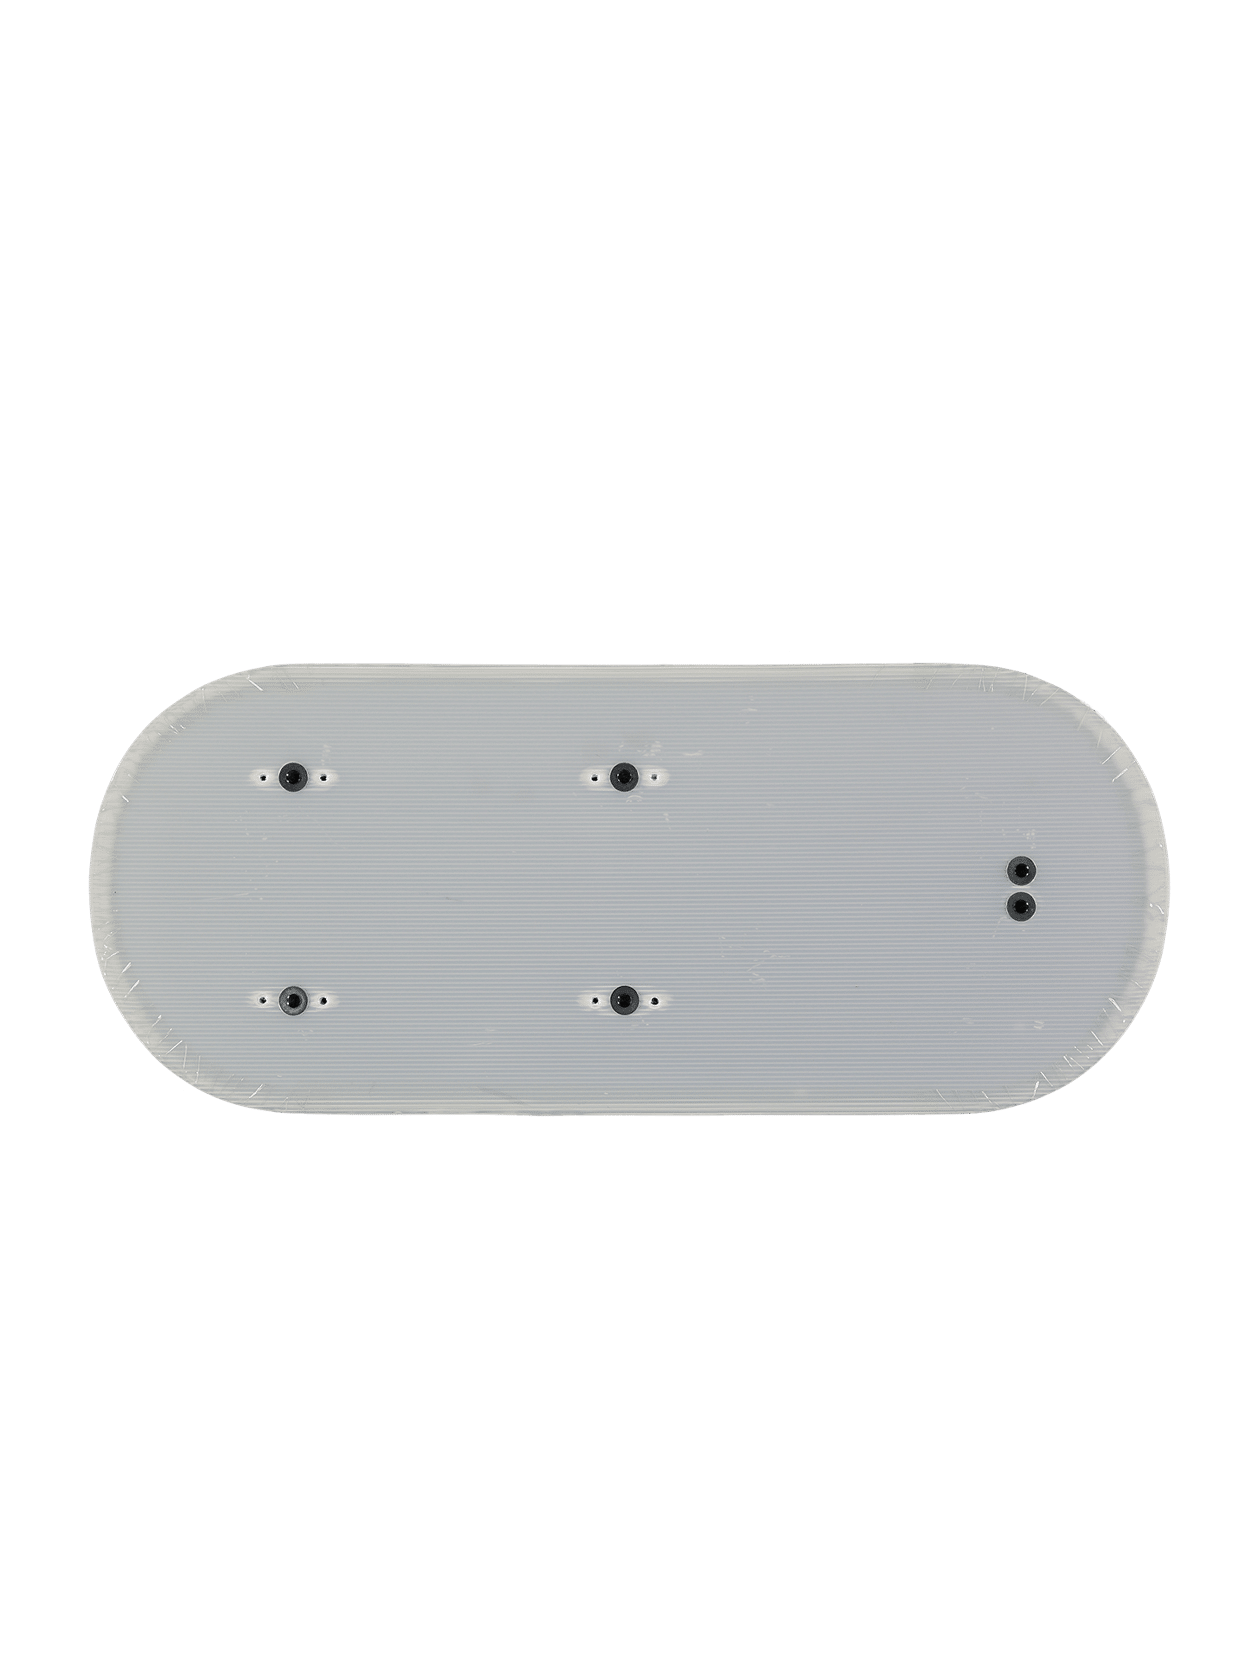 Strawberry2 Carrycot Baseboard